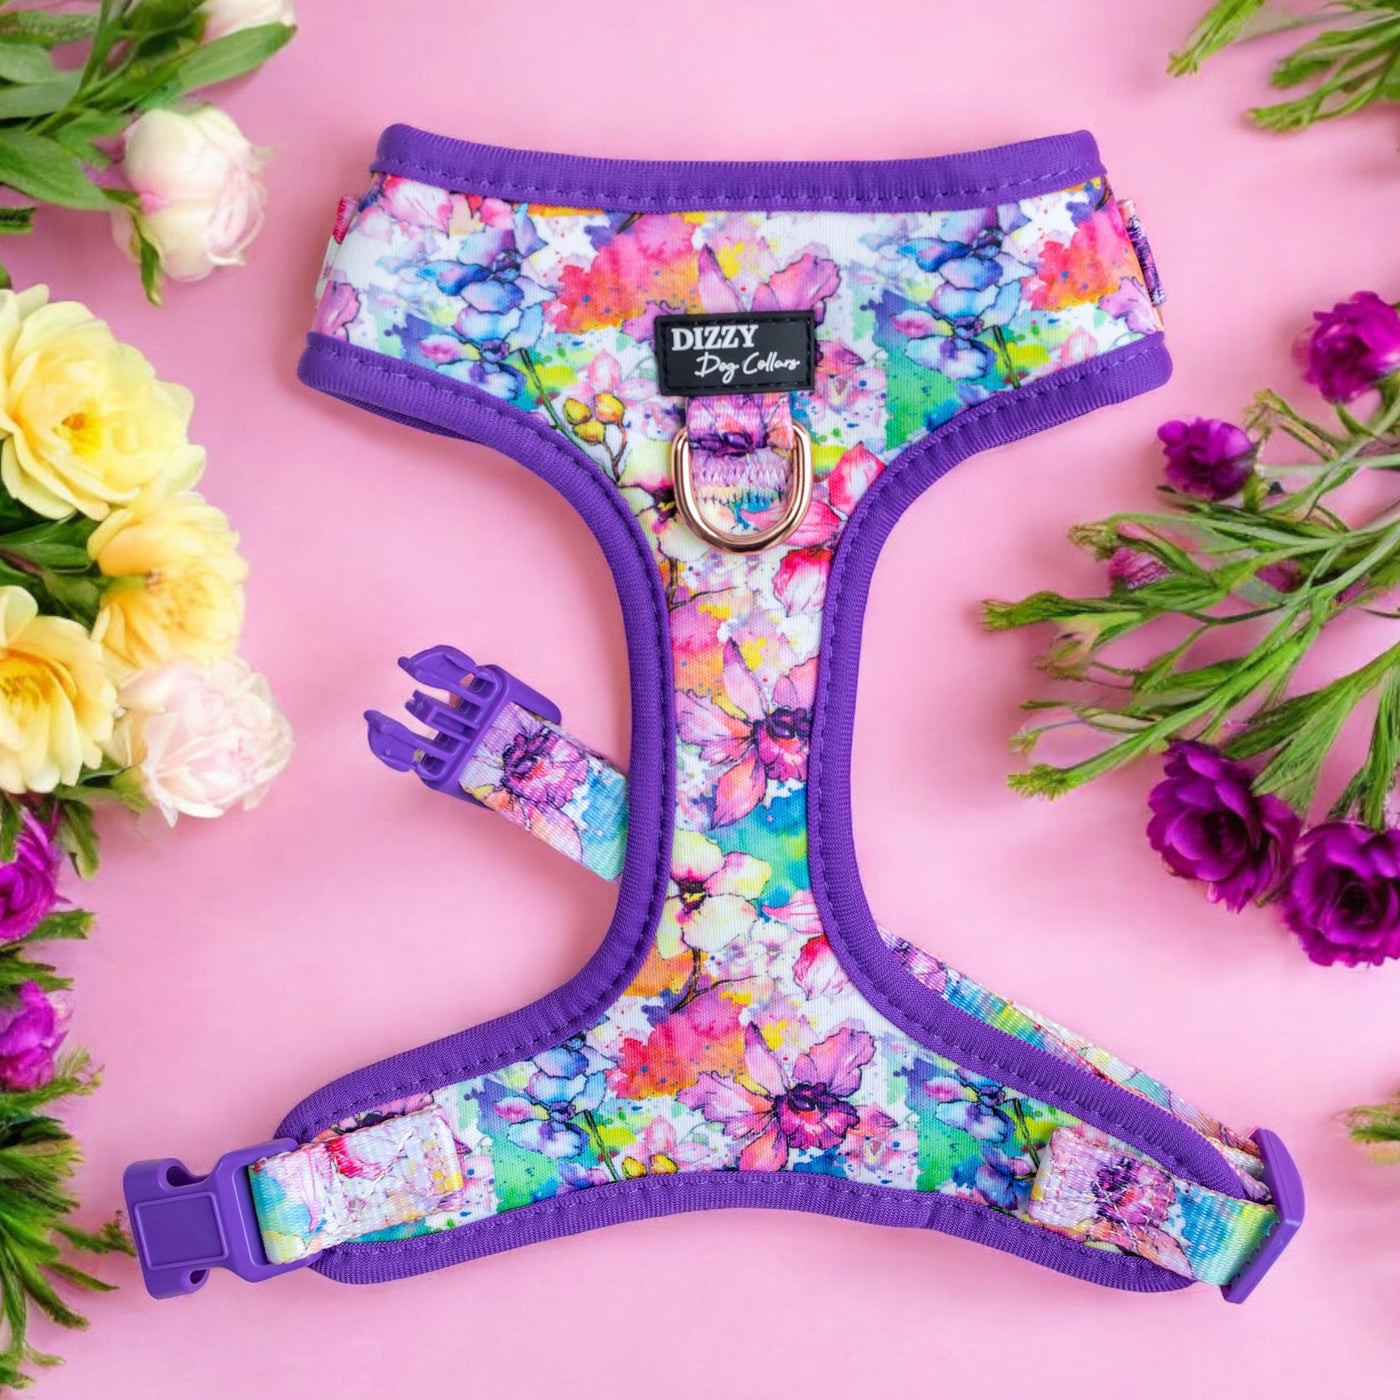 This image features a vibrant dog harness with a colourful floral watercolor pattern, including shades of purple, pink, blue, green, and yellow. The harness, branded "Dizzy Dog Collars," has purple borders and clasps. It is set against a pink background and surrounded by an assortment of flowers in matching colours, enhancing the overall aesthetic and creating a visually pleasing, coordinated look.